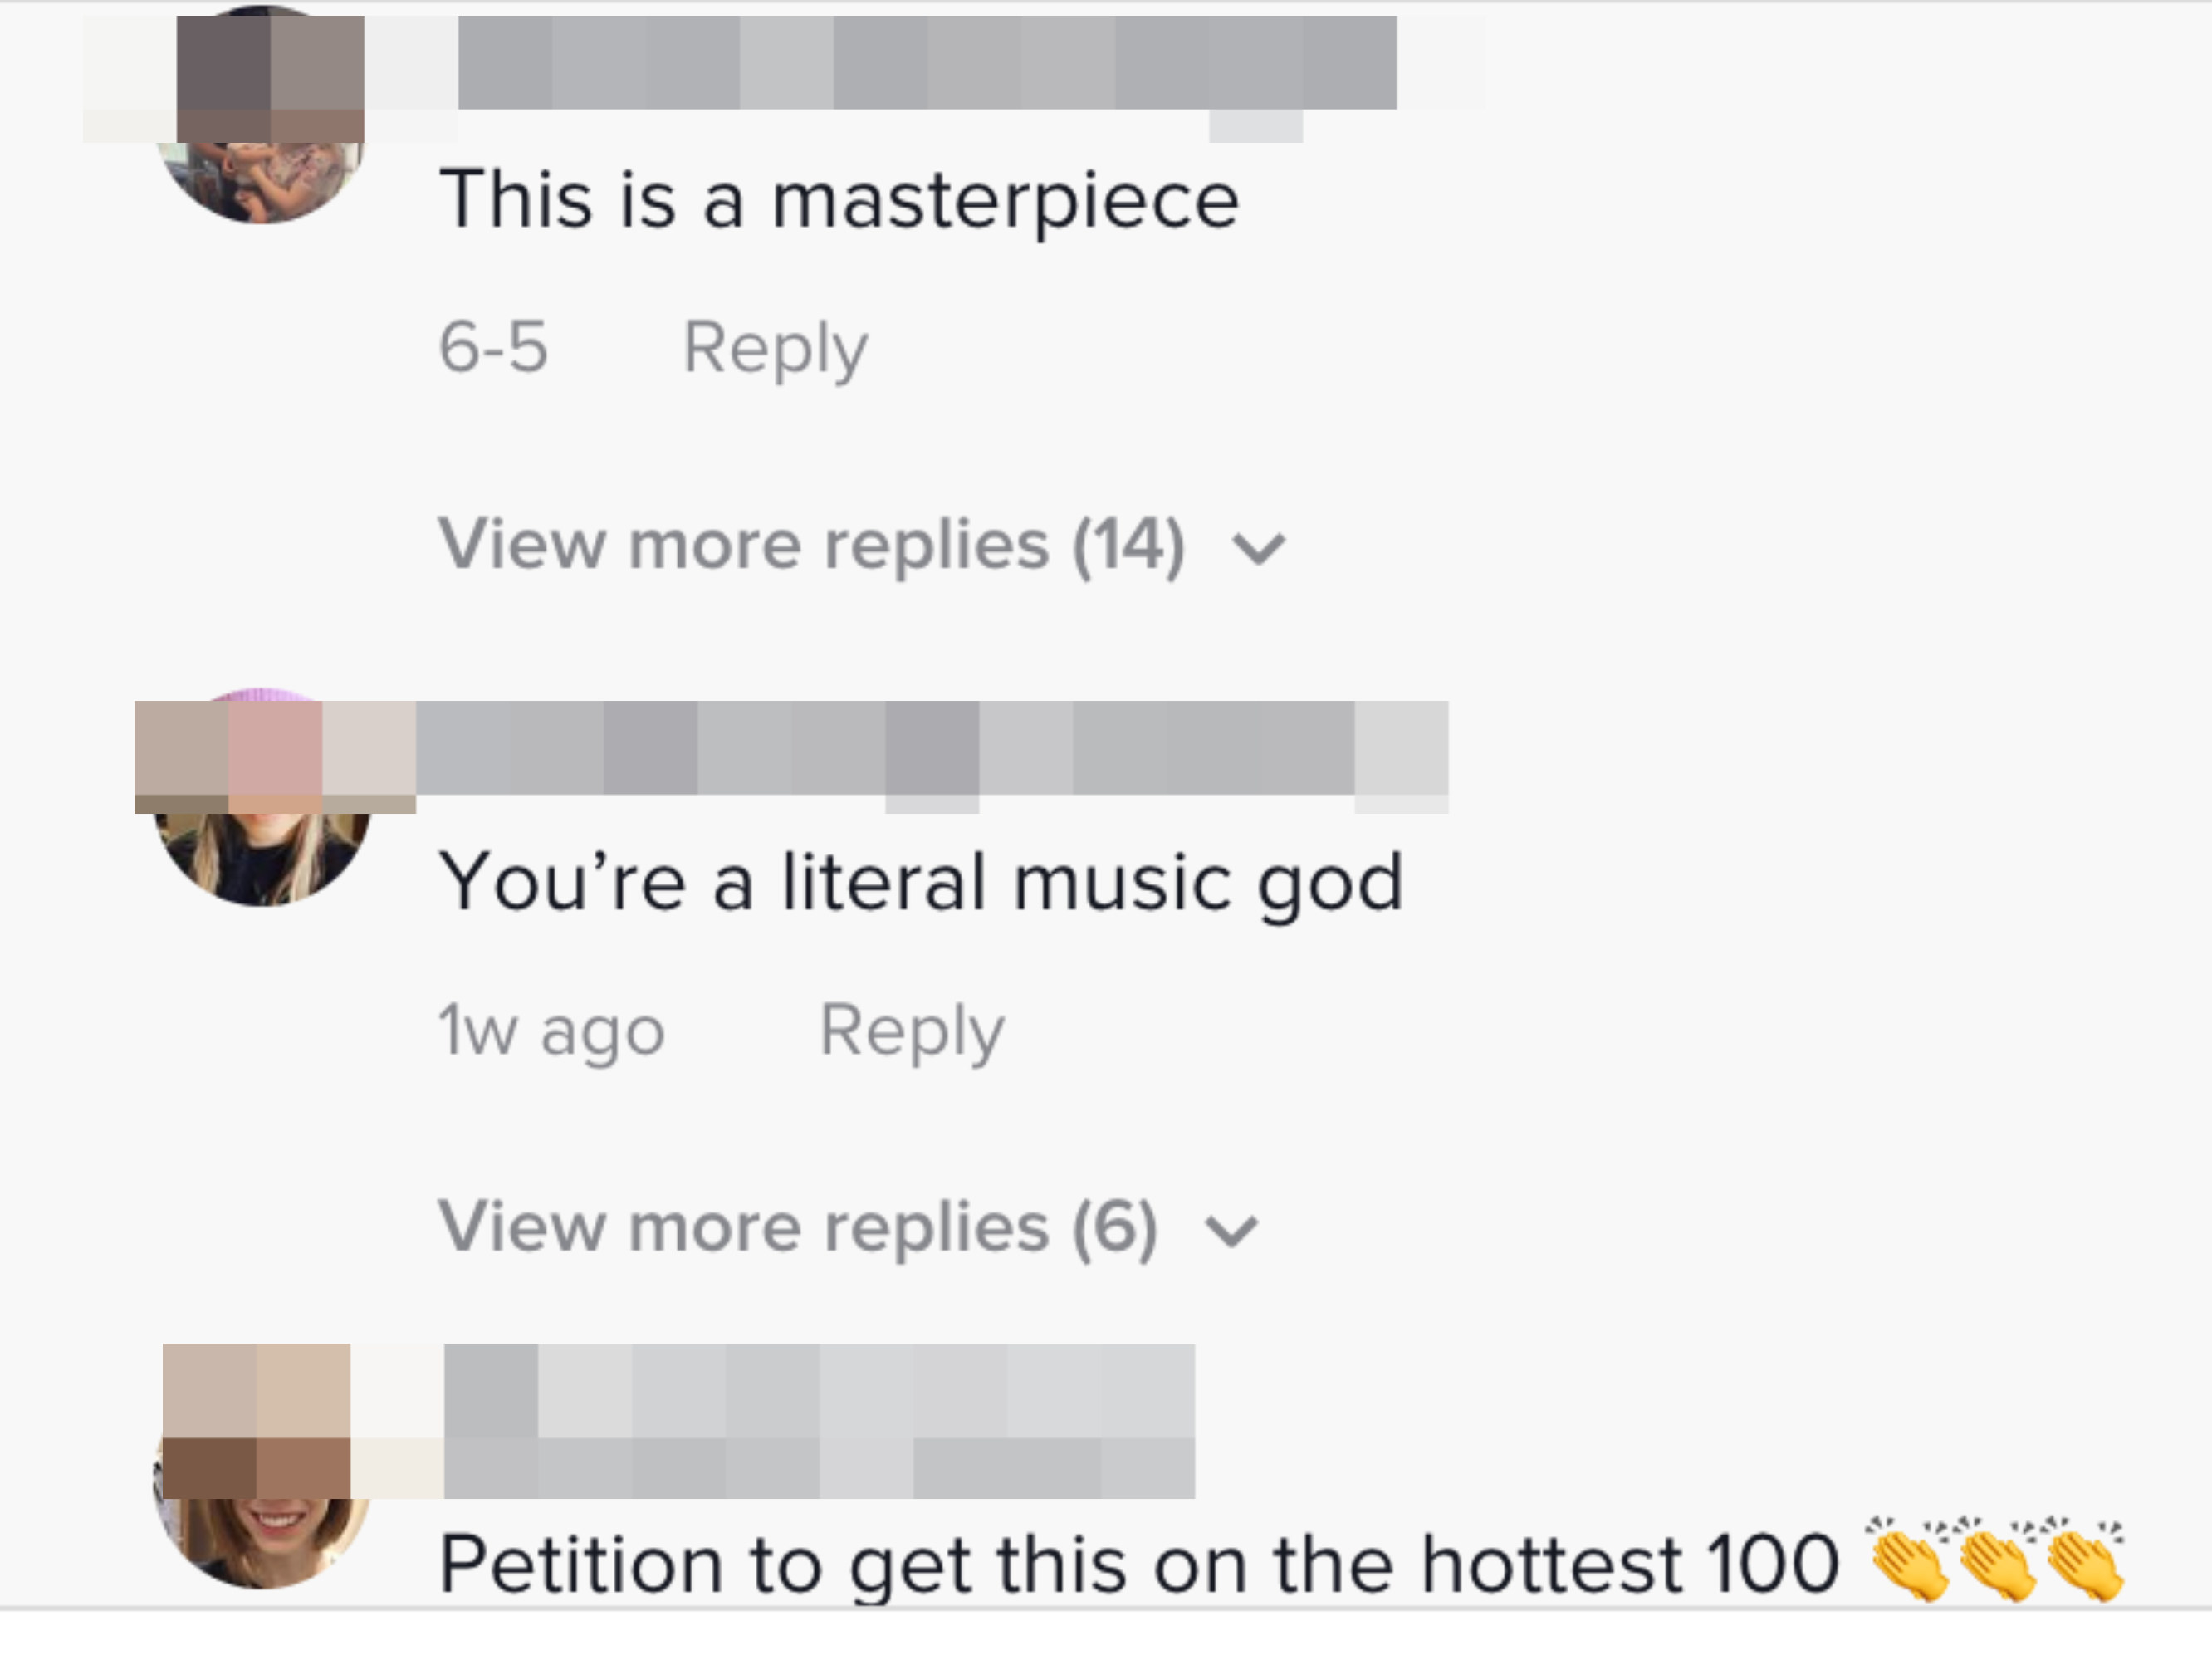 Multiple commenters praising the song, including one saying &quot;This is a masterpiece&quot; and another saying &quot;You&#x27;re a literal music god&quot;